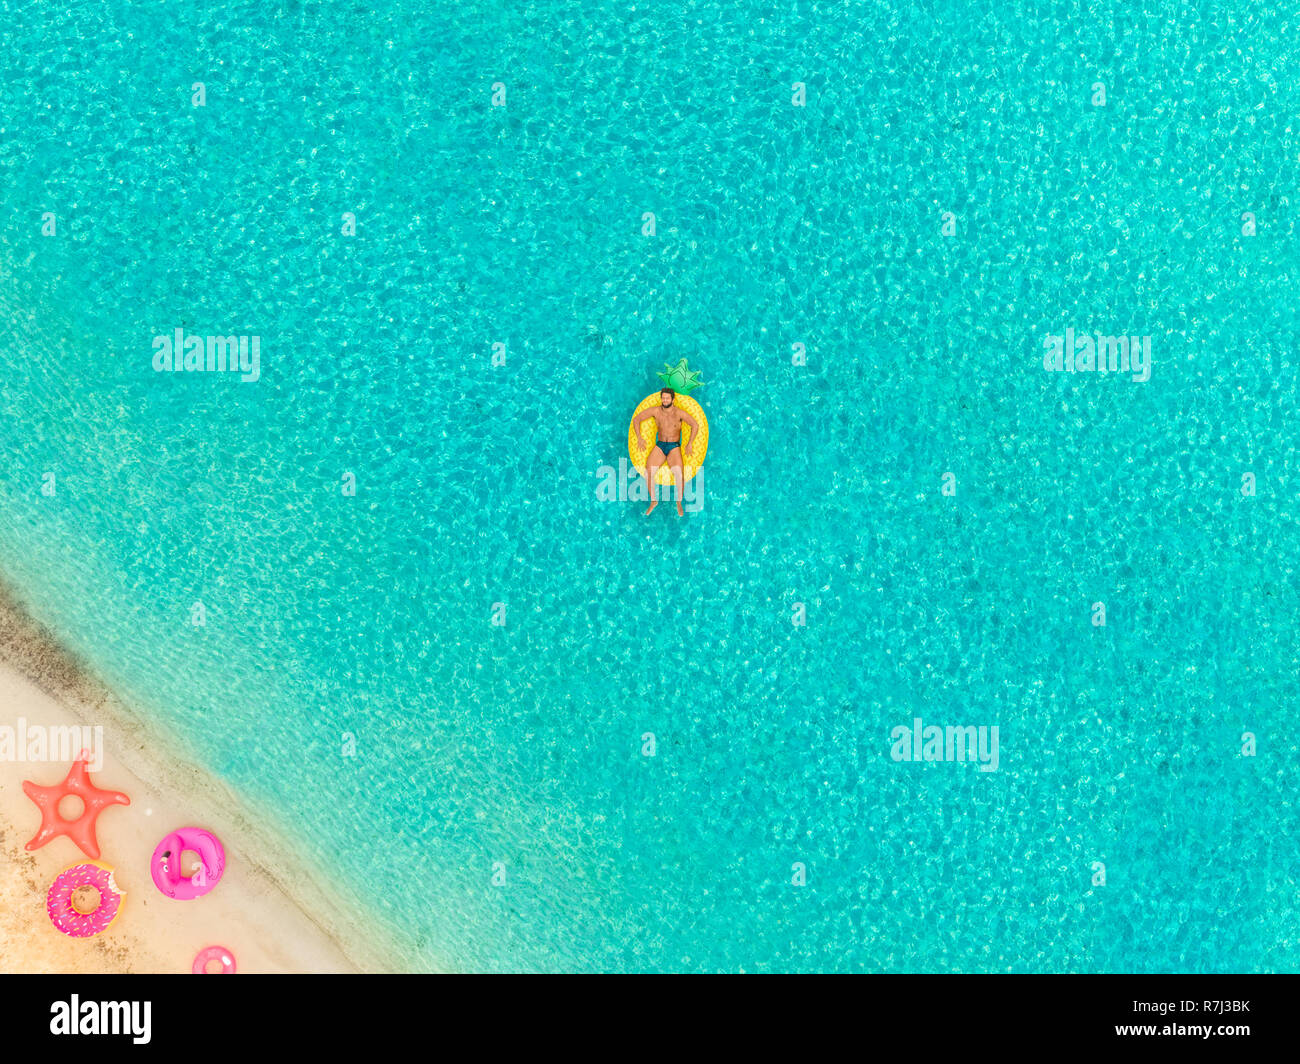 Aerial view of man floating on inflatable pineapple mattress by sandy beach and inflatable rings. Stock Photo